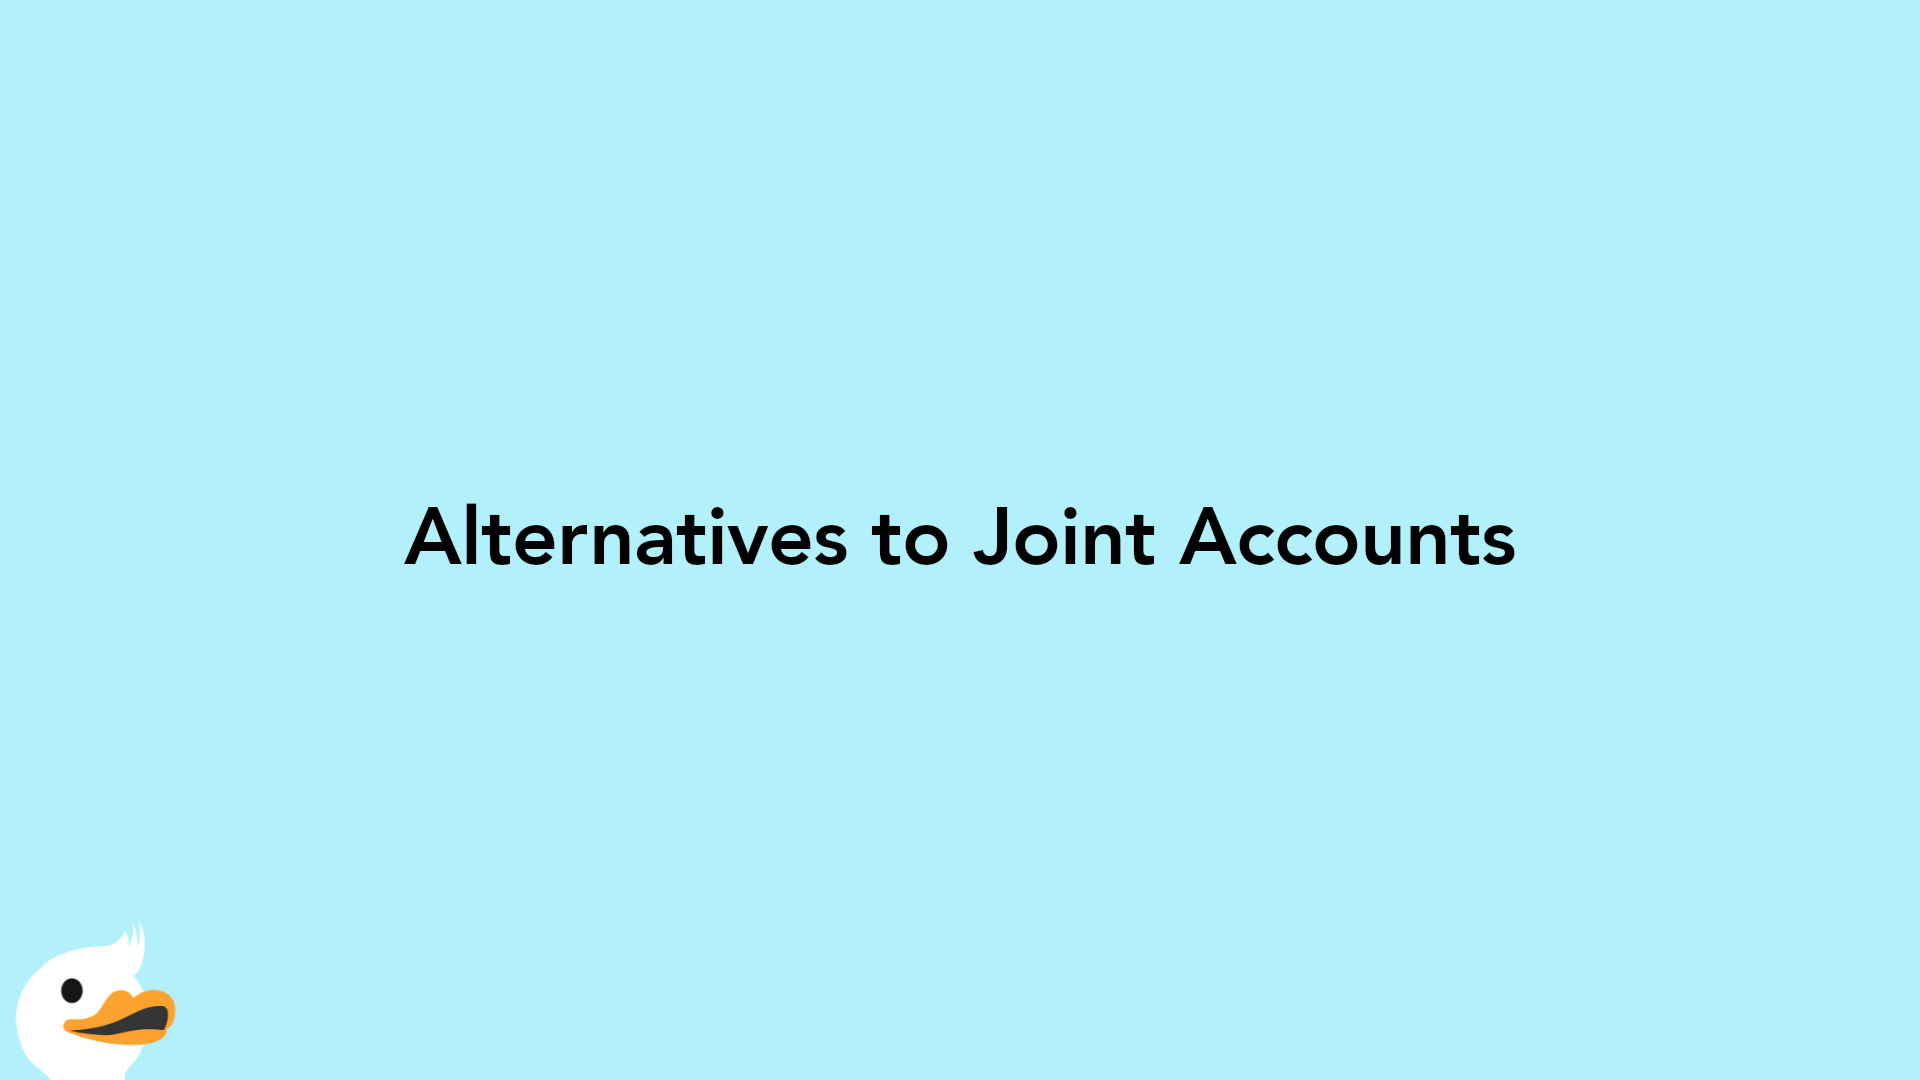 Alternatives to Joint Accounts